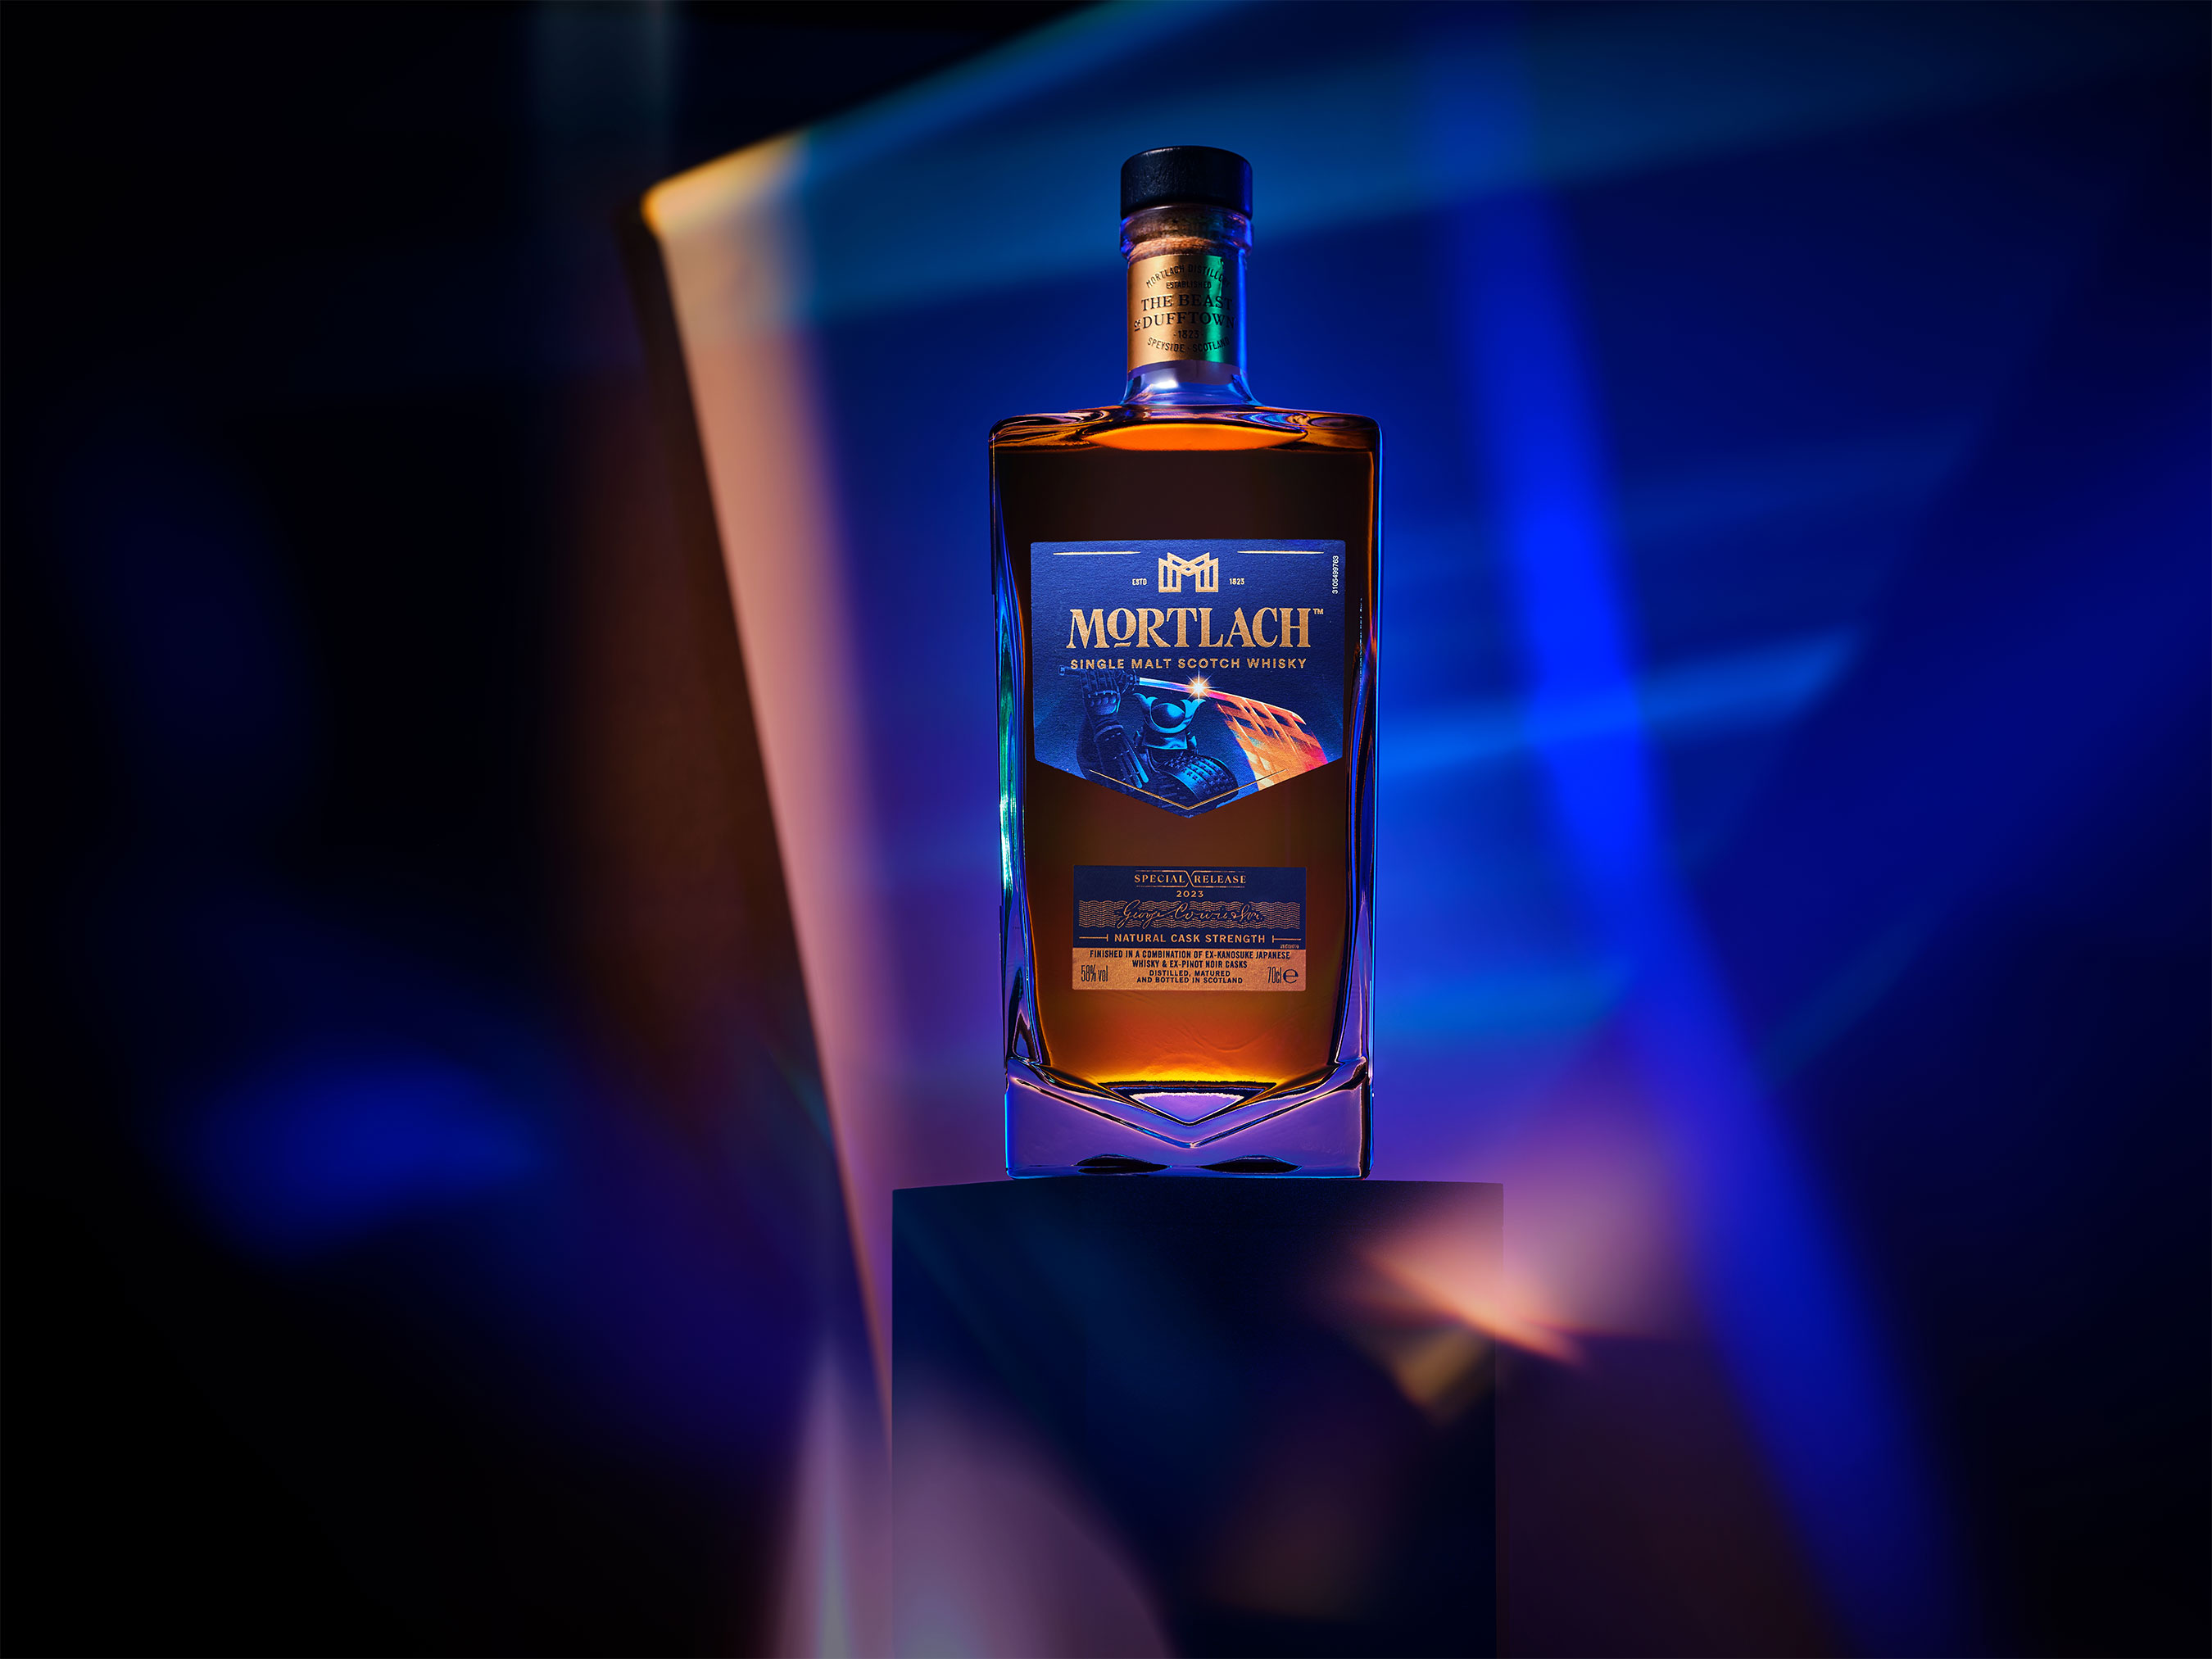 Mortlach ‘The Katana’s Edge’, finished in ex-Kanosuke Japanese whisky and ex-Pinot Noir casks